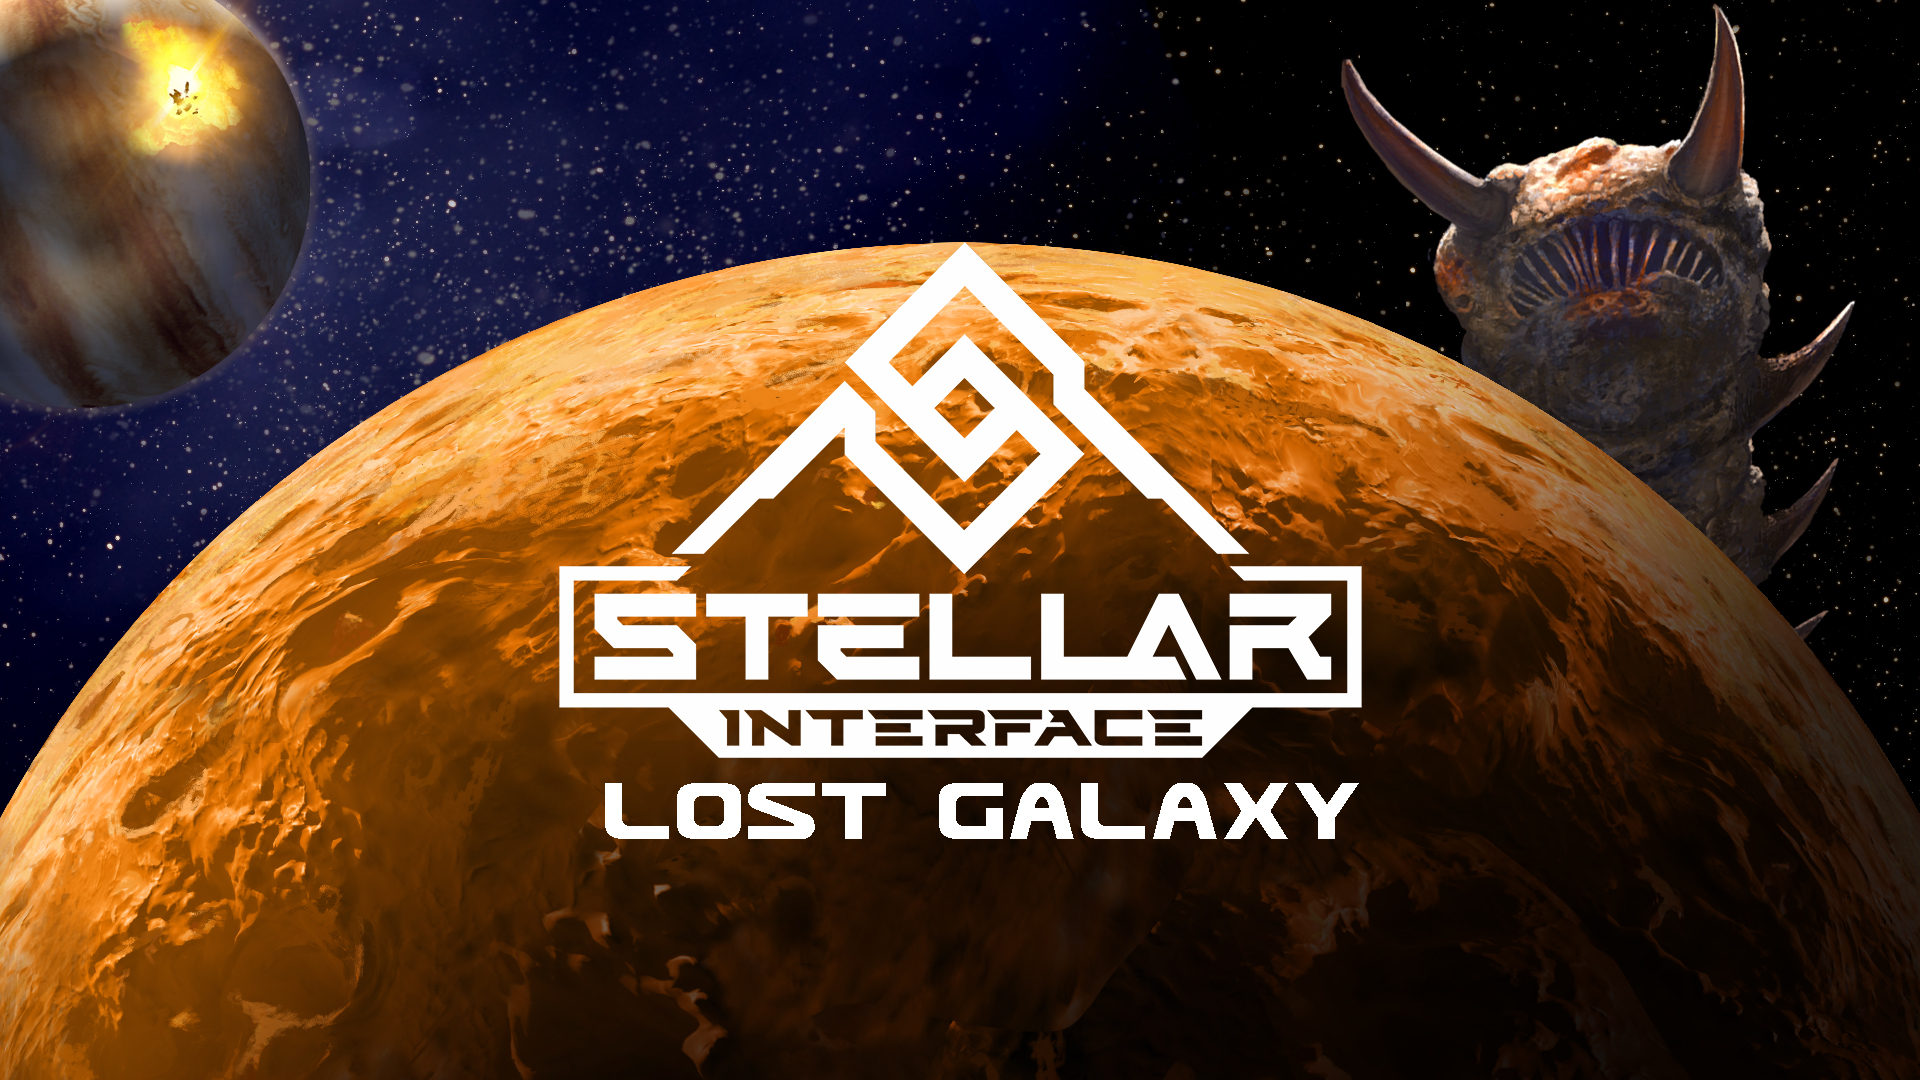 Stellar Interface download the new